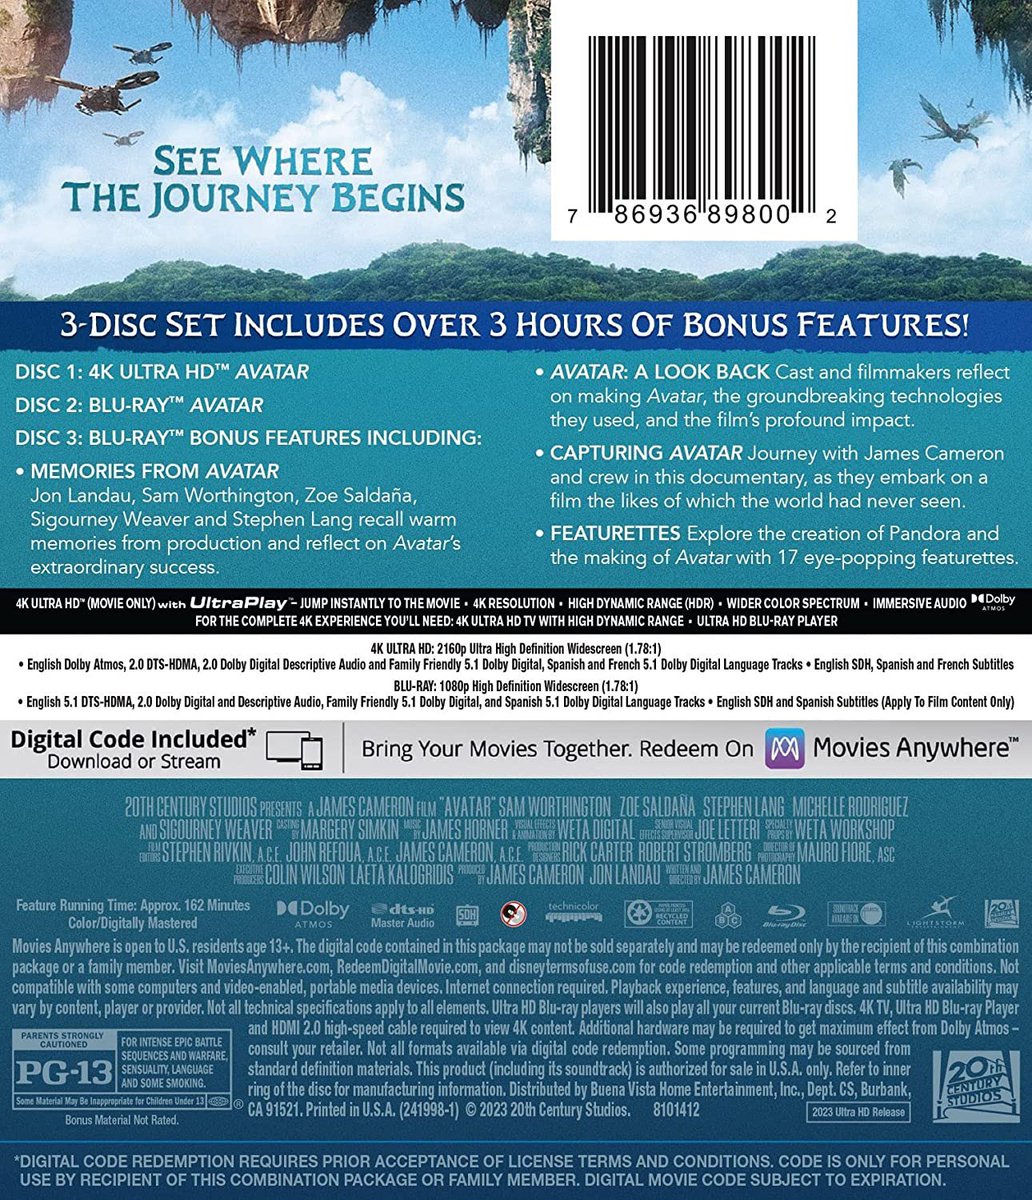 #Avatar #4KBluray front and back cover. #DolbyAtmos logo is present, #DolbyVision is missing on the disc as expected from Disney.